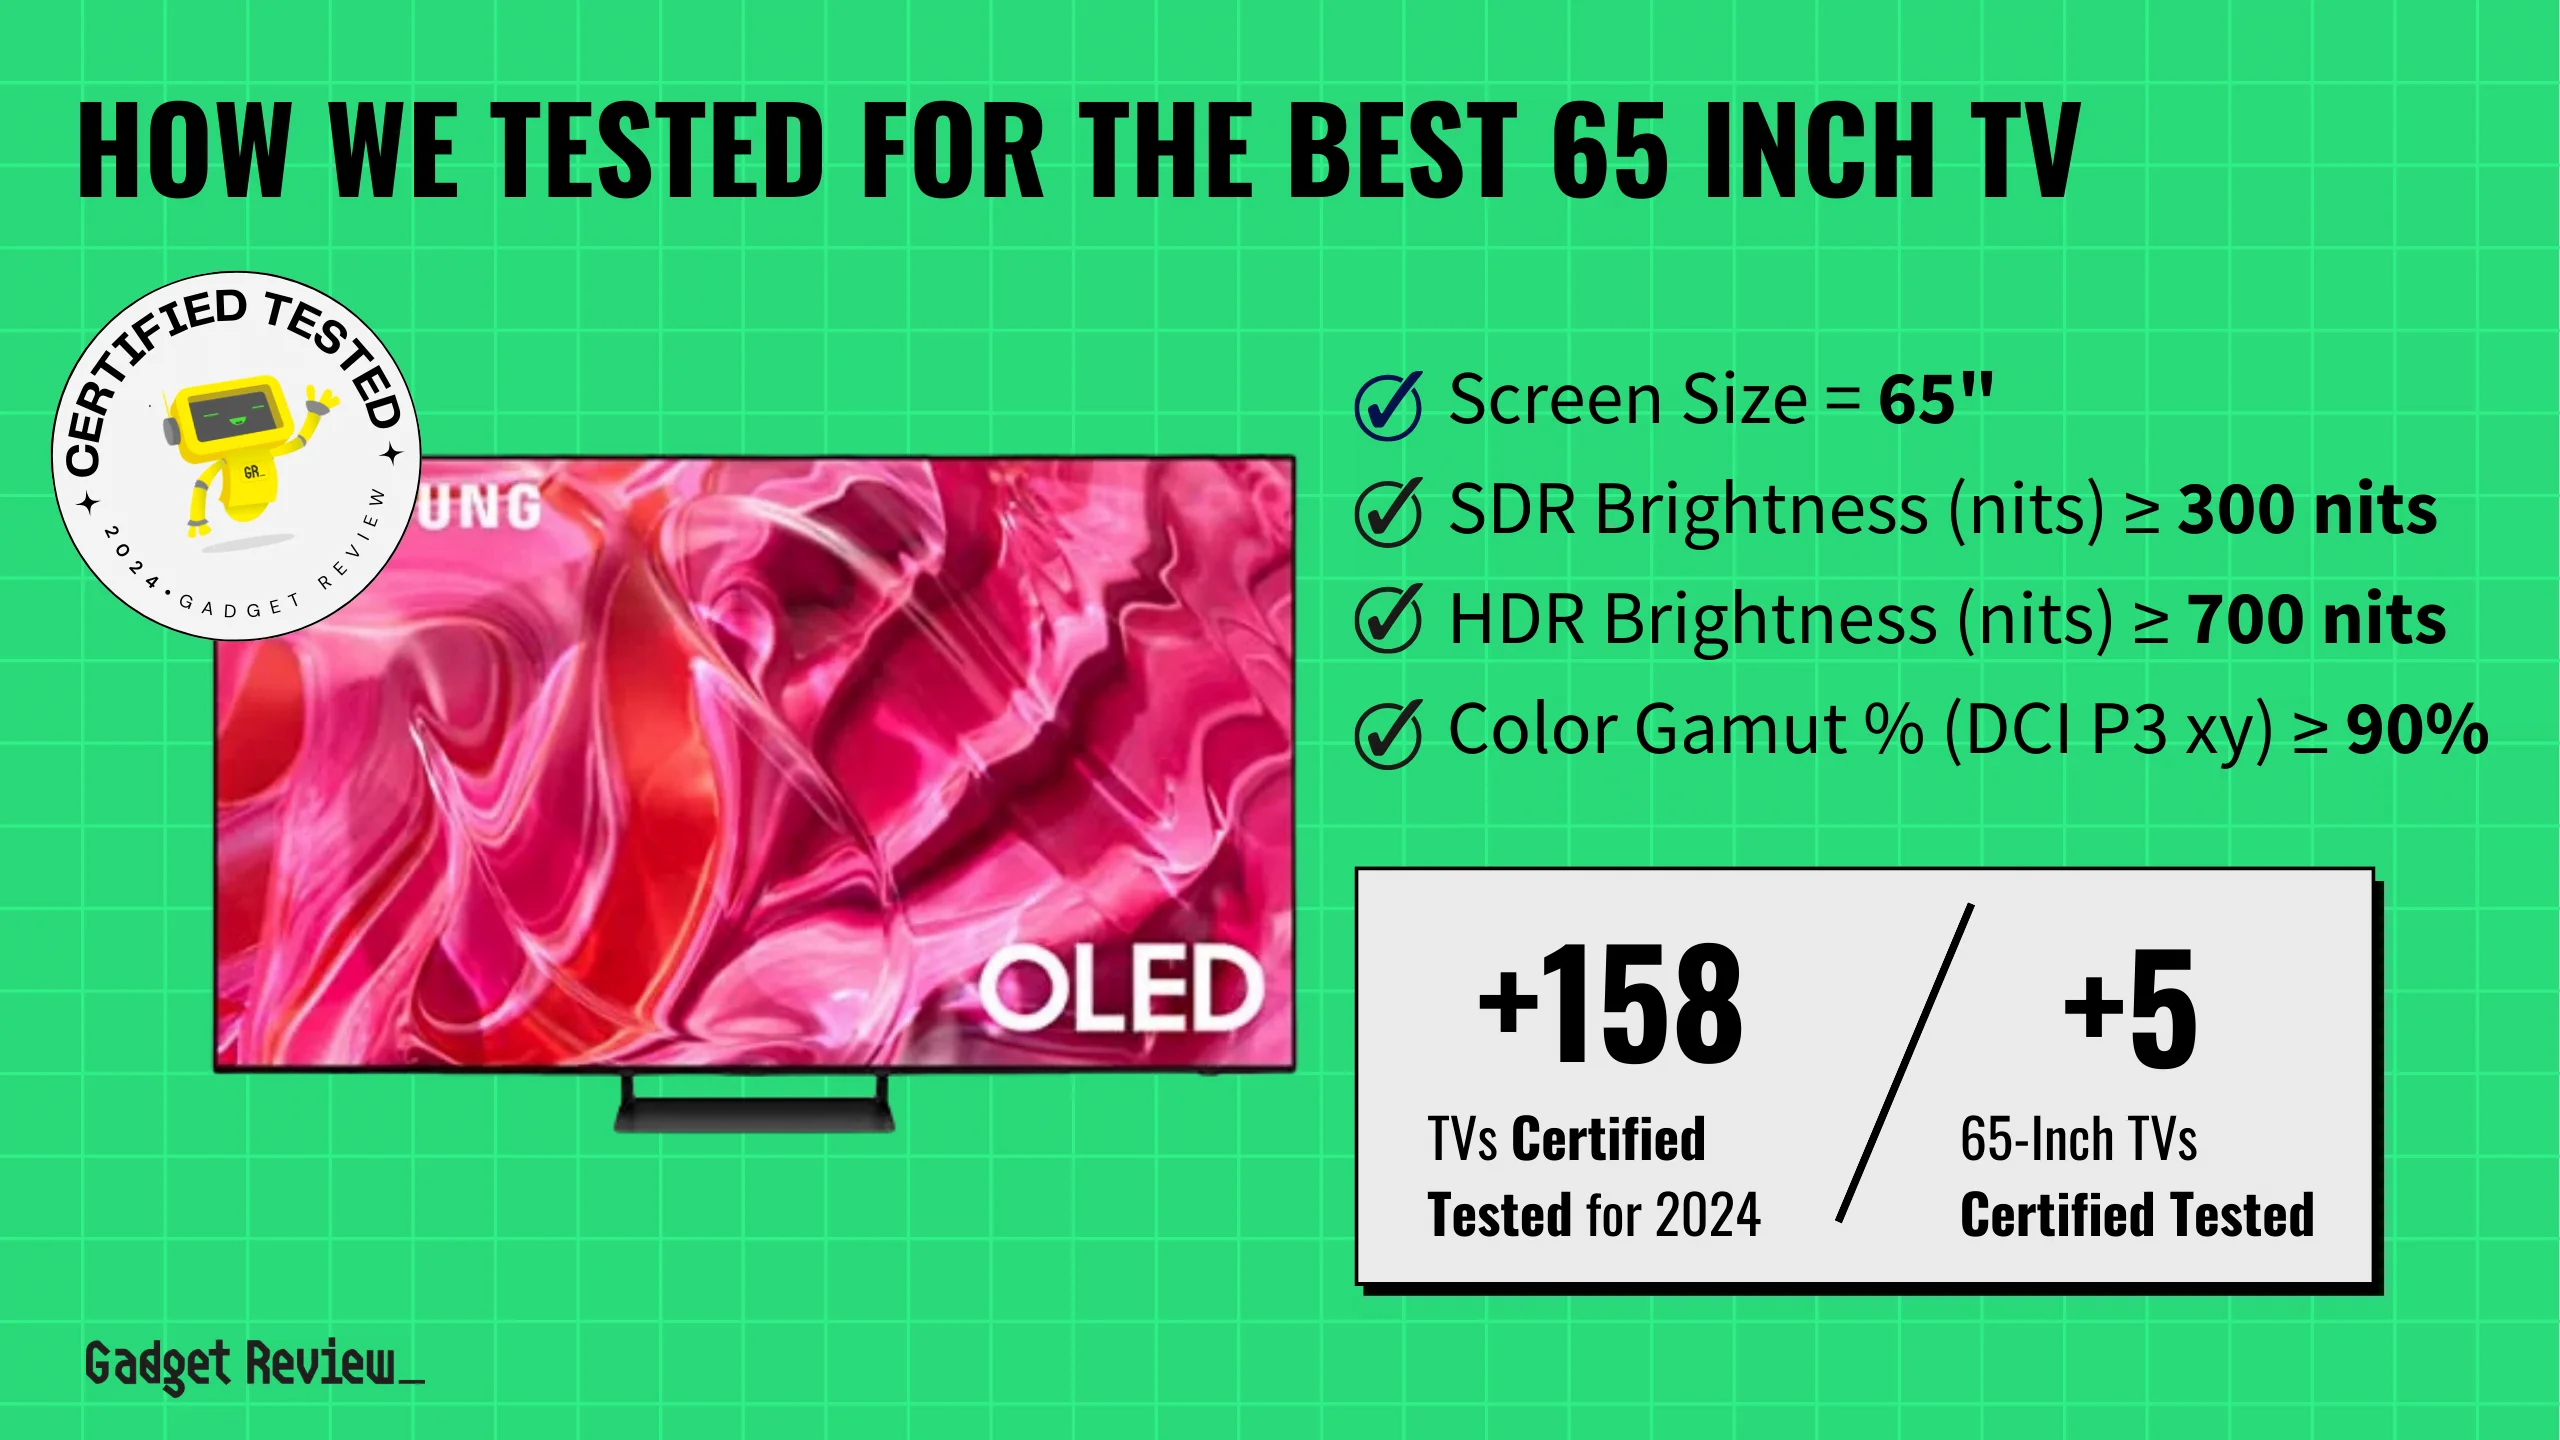 TV Backlight Vs. Brightness Differences In Picture Quality